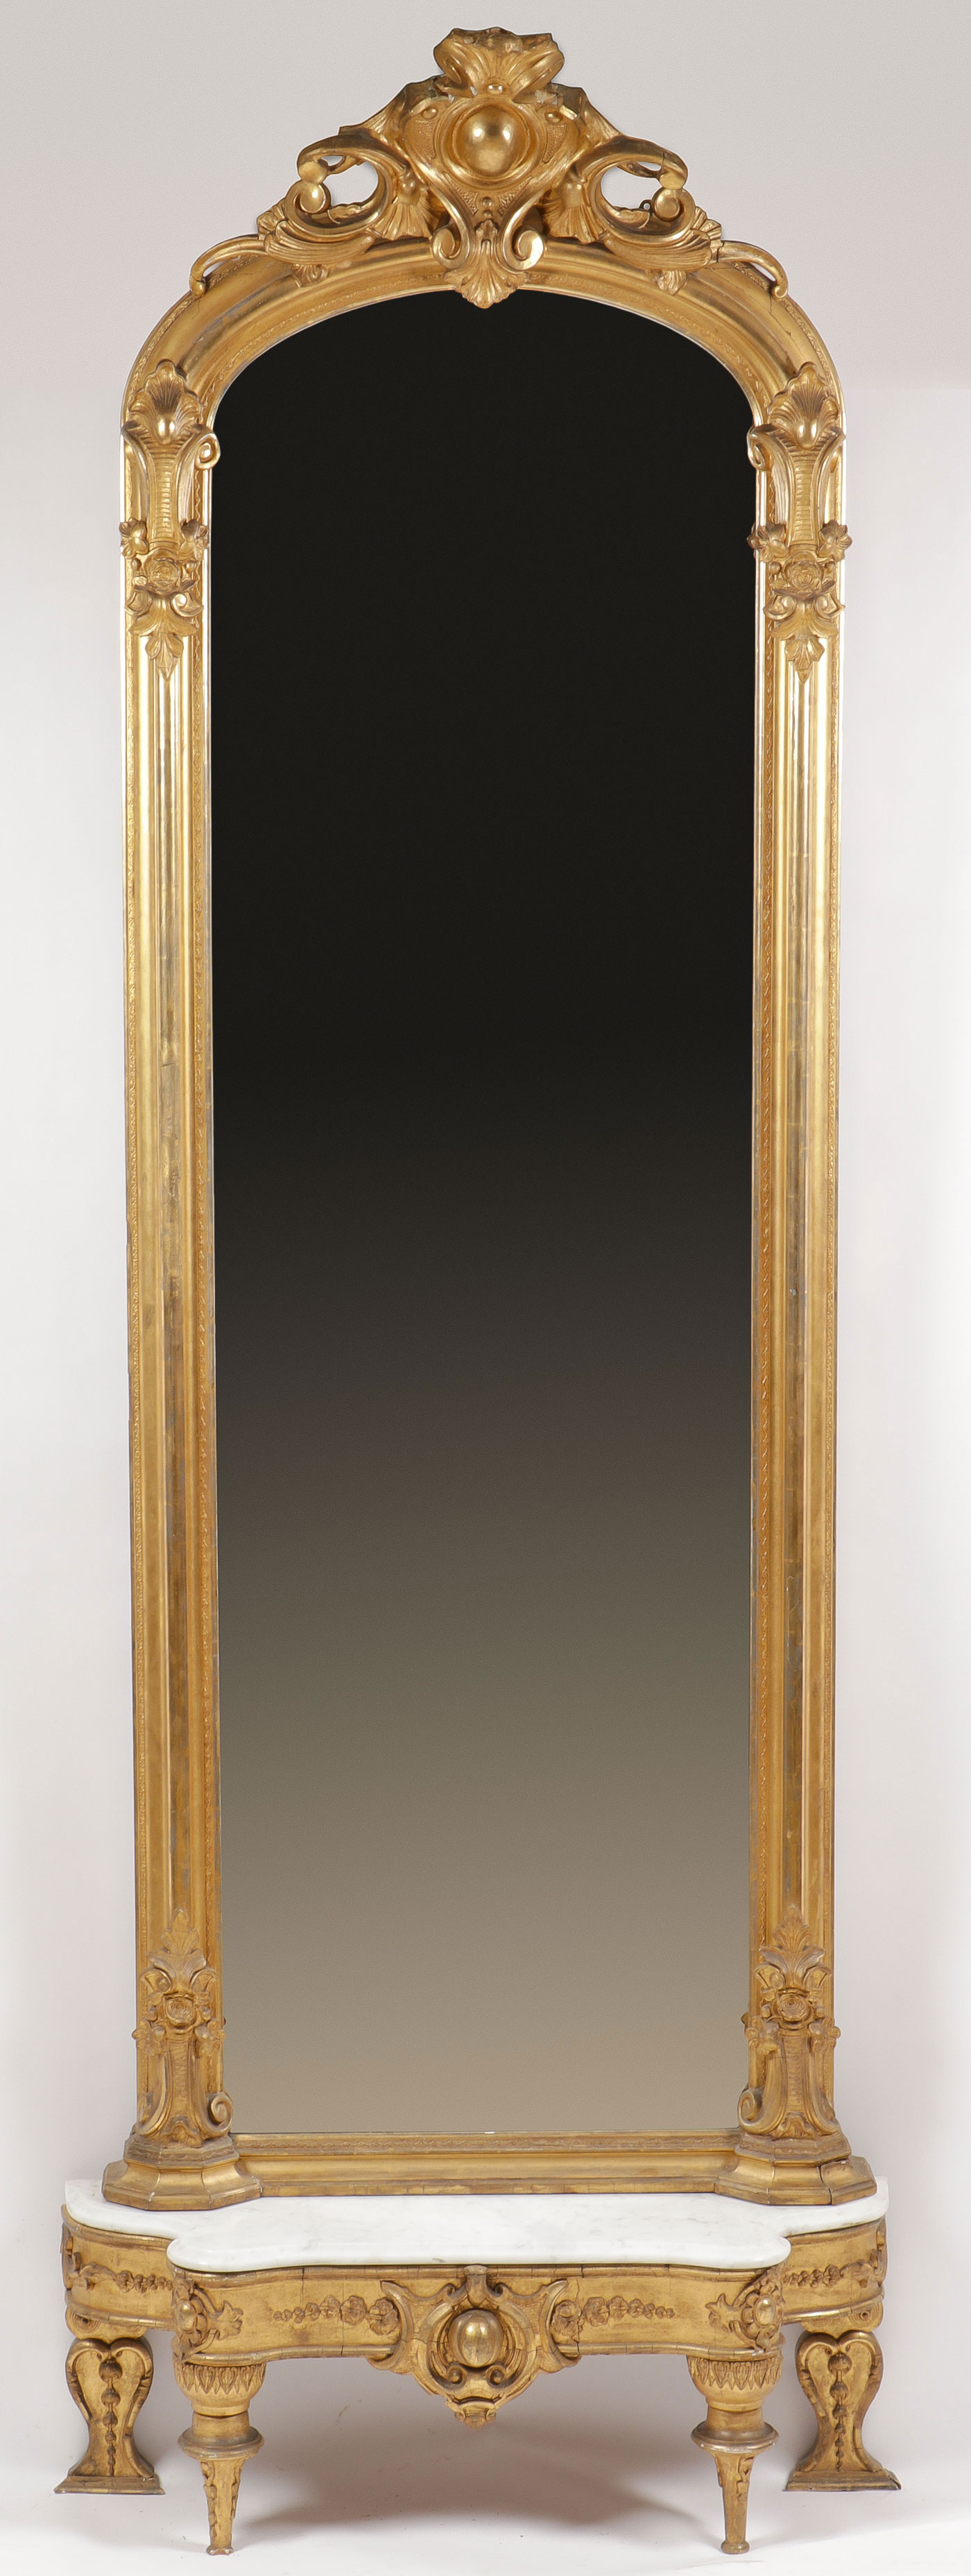 LARGE GILT PIER MIRROR WITH CONSOLE TABLE